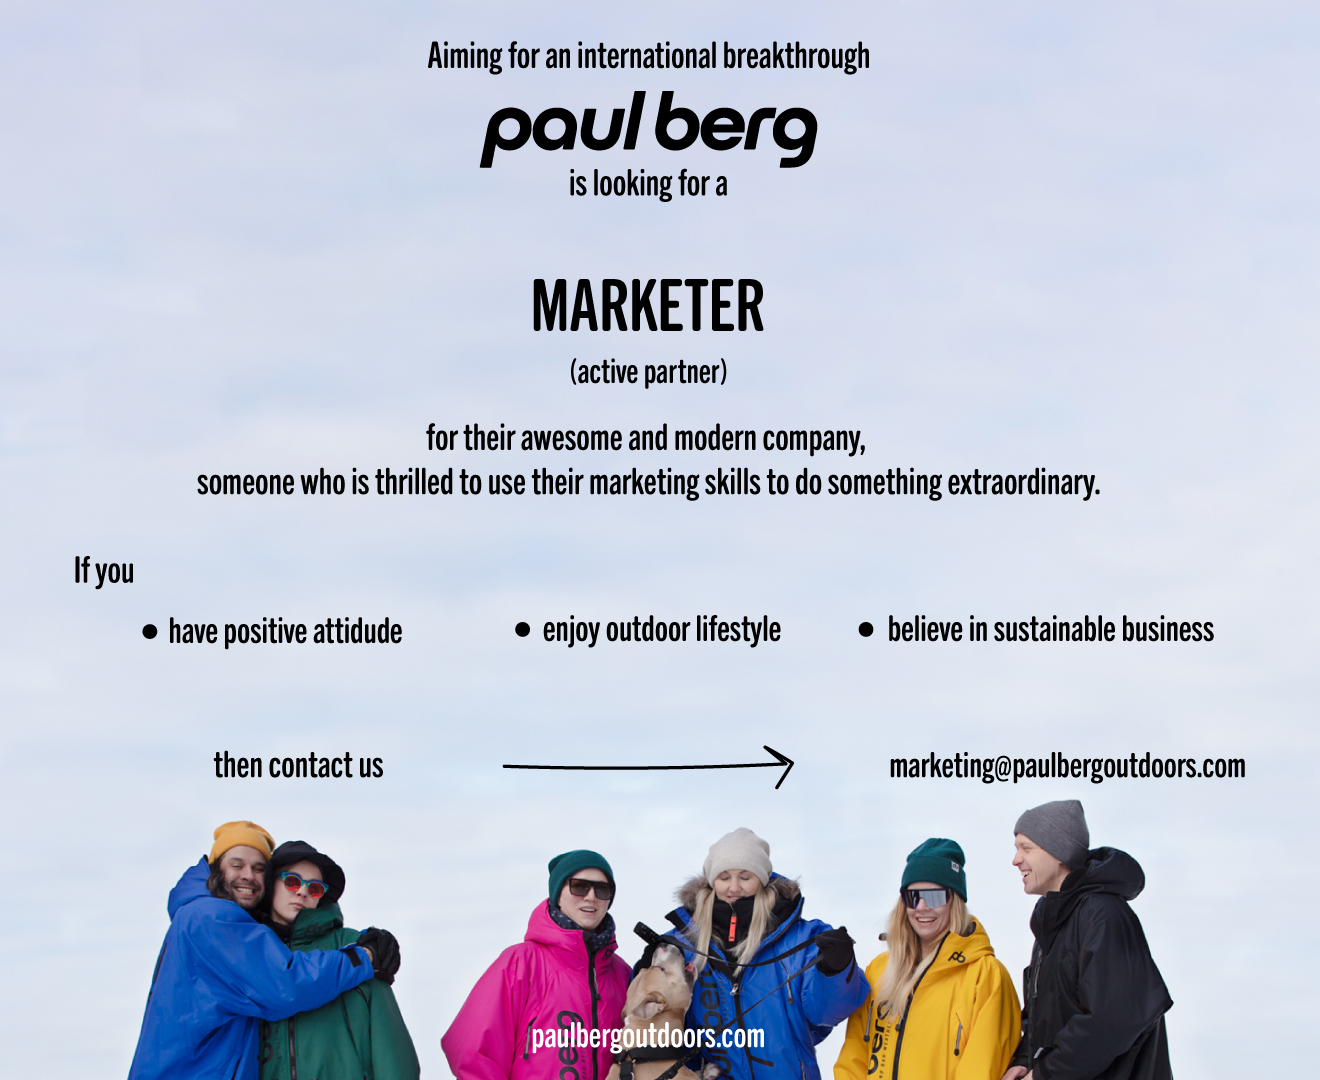 Aiming for an international breakthrough Paul Berg is looking for a MARKETER (active partner) for their awesome and modern company, someone who is thrilled to use their marketing skills to do something extraordinary. If you have positive attitude, enjoy outdoor lifestyle and believe in sustainable business then contact us:marketing@paulbergoutdoors.com